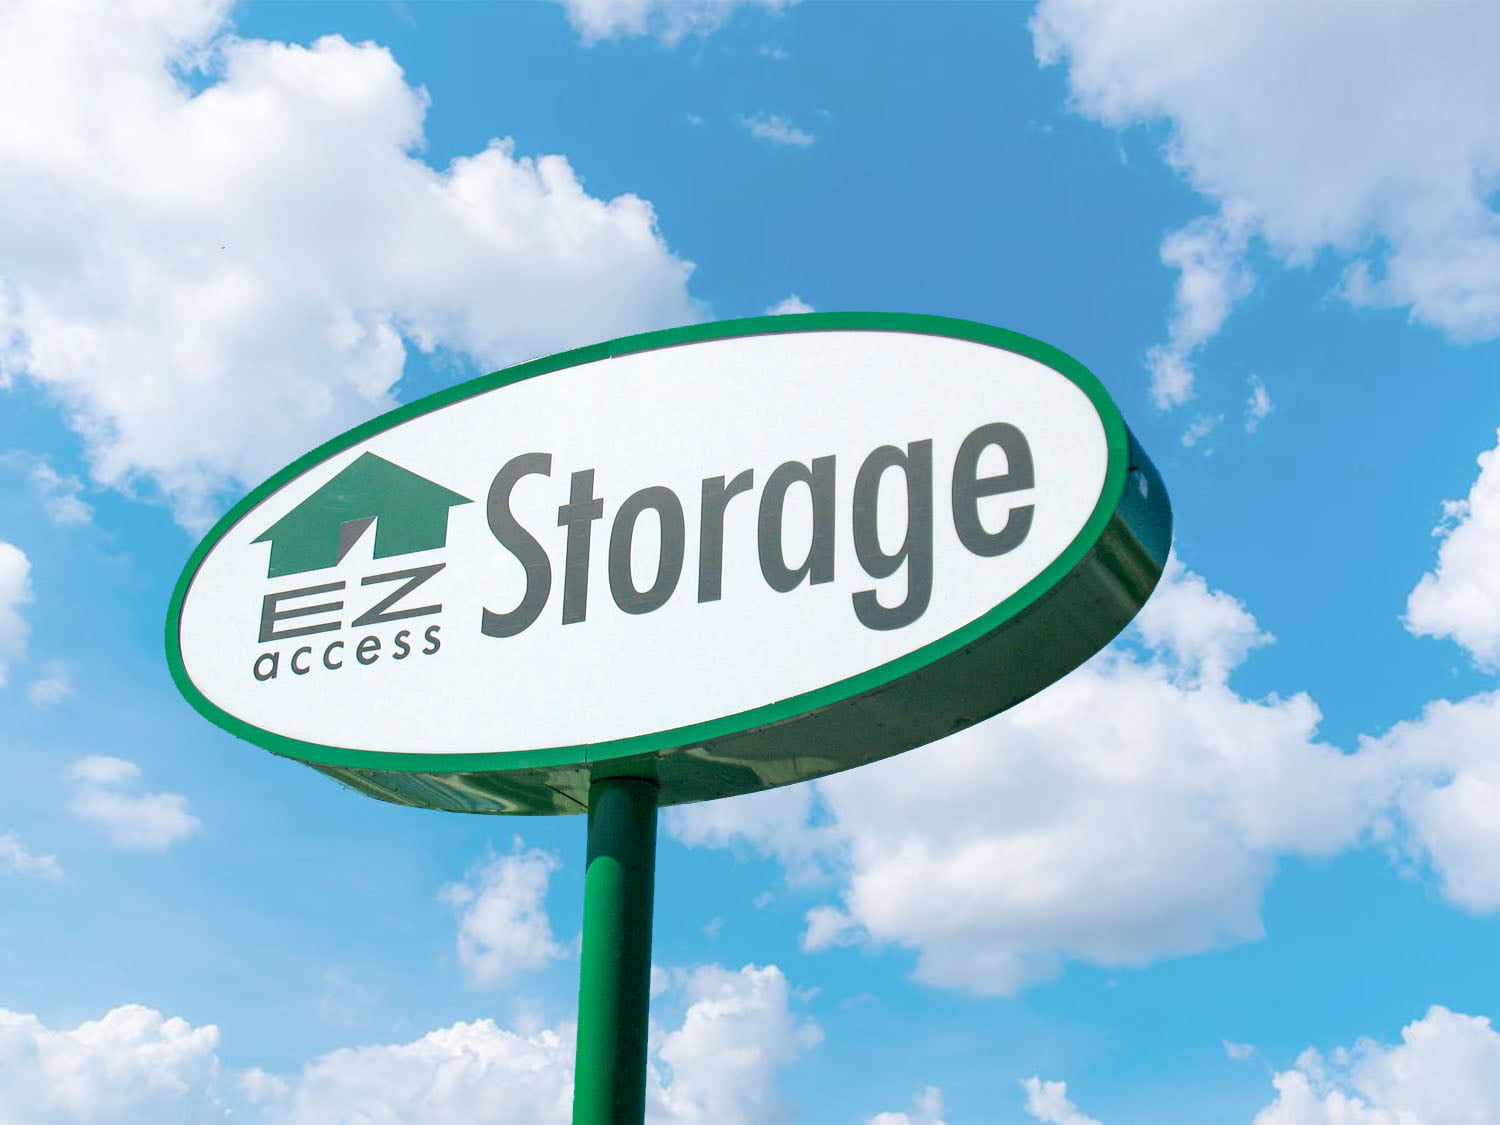 EZ Access Storage facility sign with cloud background